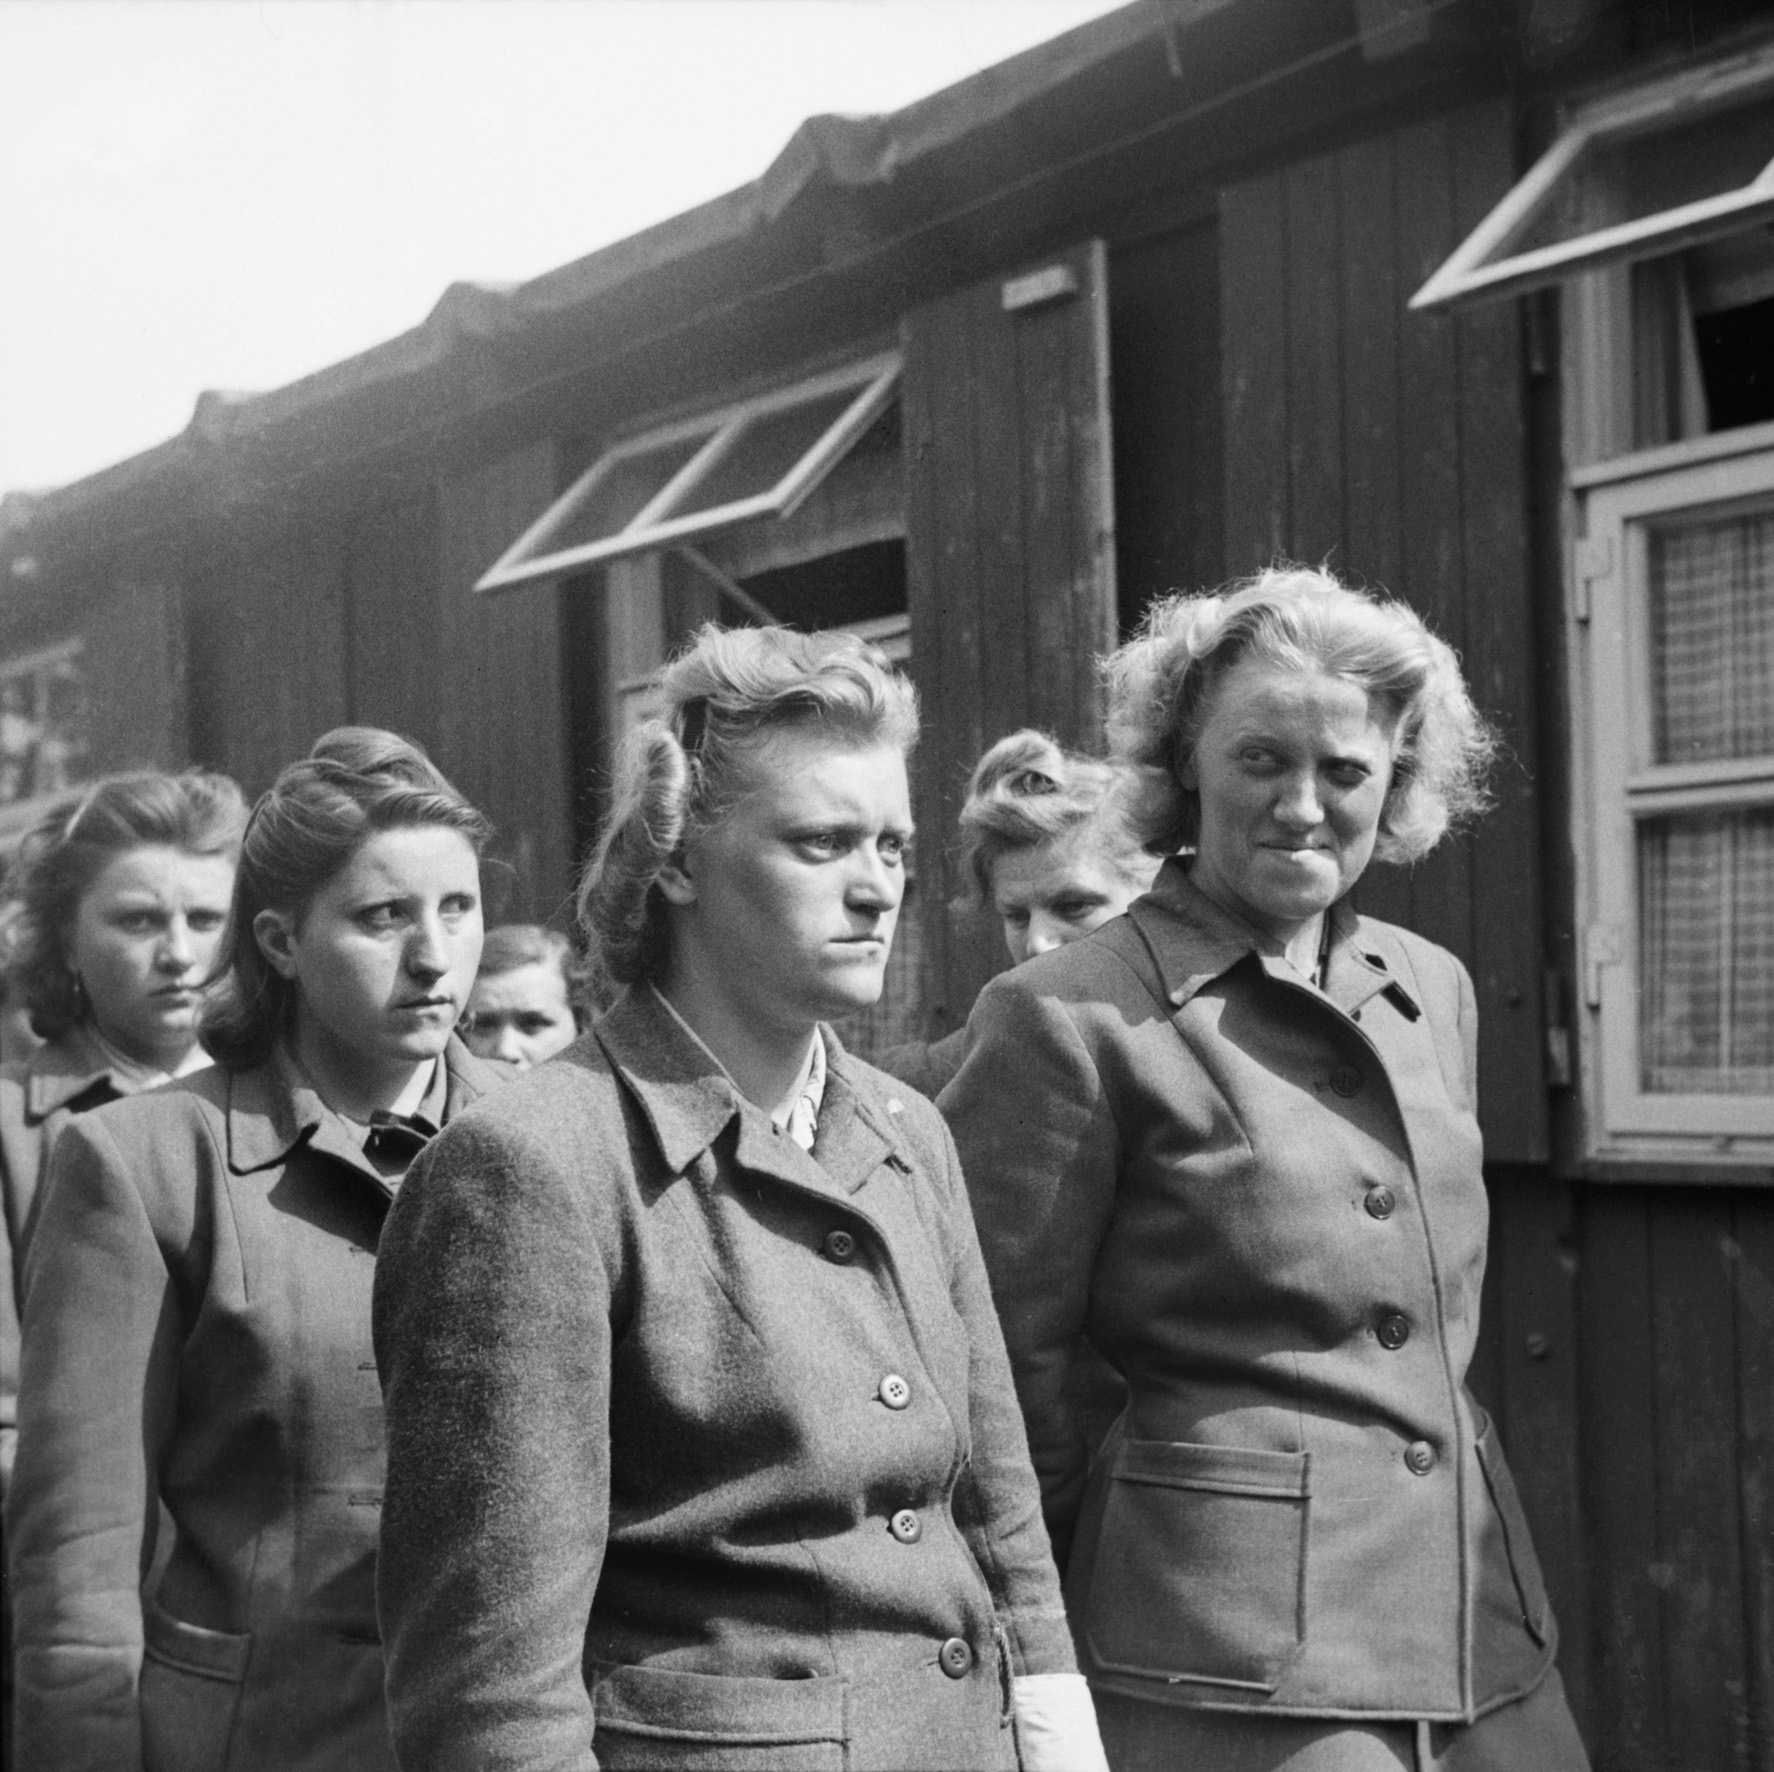 After the British liberated Bergen-Belsen on April 15, 1945, the female guards, shown here, were ordered to help bury the thousands of bodies. Pictured are Hildegard Kanbach (far left), Irene Haschke (center foreground), Head Wardress Elisabeth Volkenrath (second from right, partly hidden), and Herta Bothe (far right).